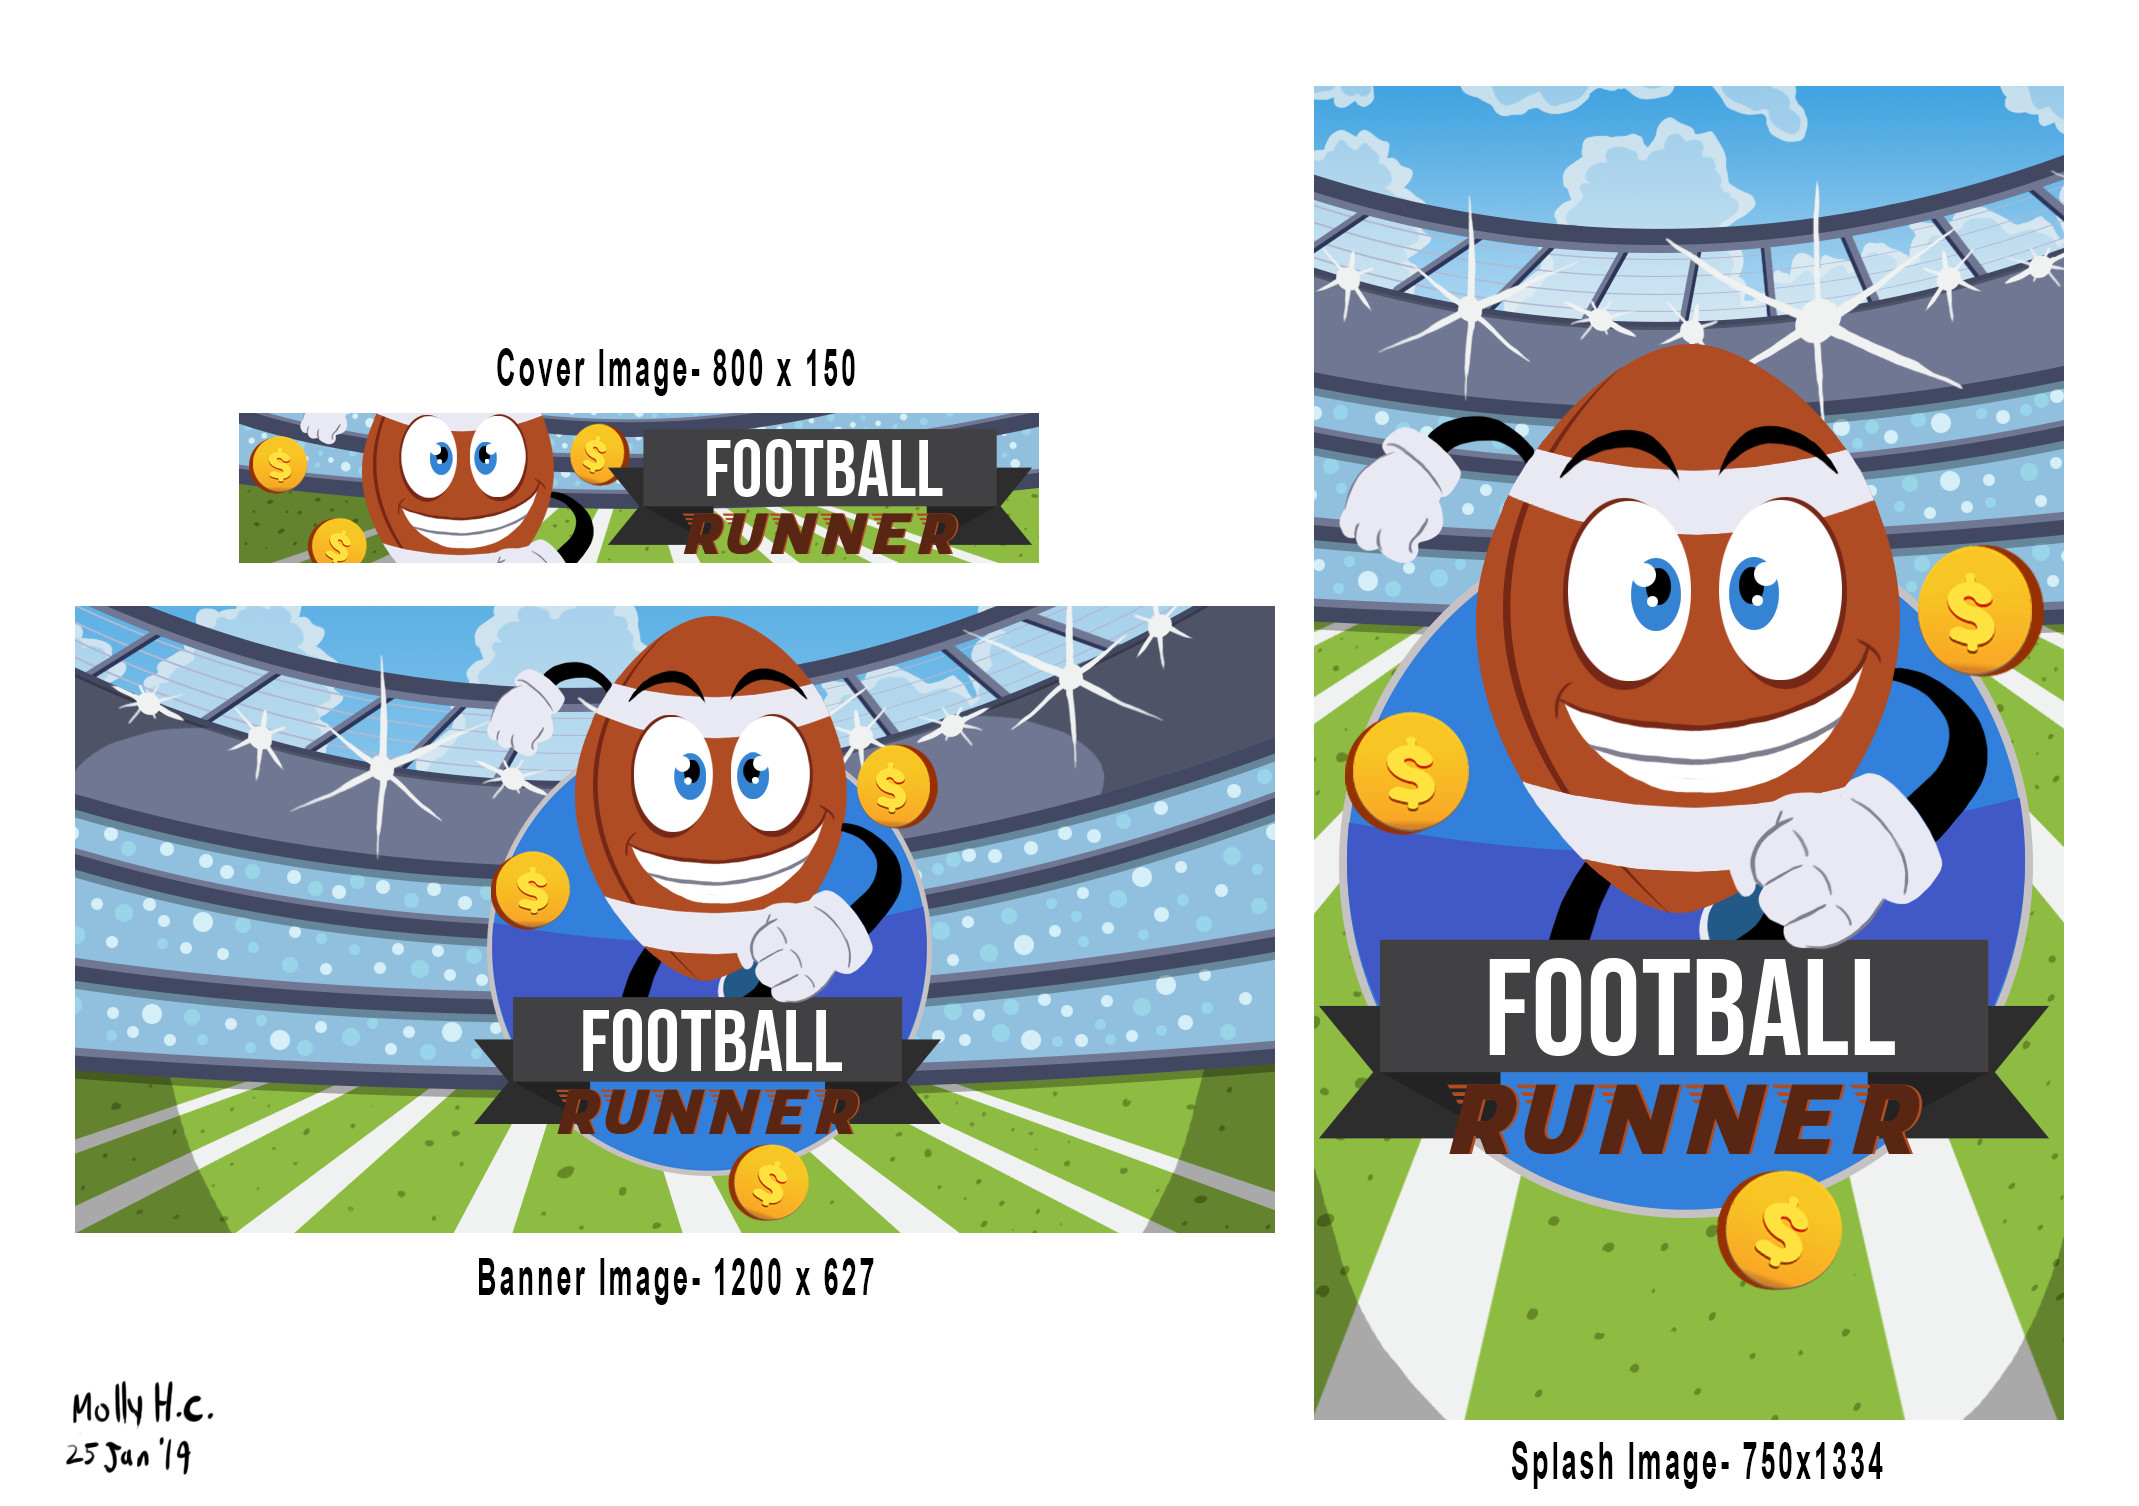 Football Runner App Promo Art Final Deliverables
Commissioned by Fifth Tribe Studios.
(http://showcase.fifthtribe.com/)
©2019